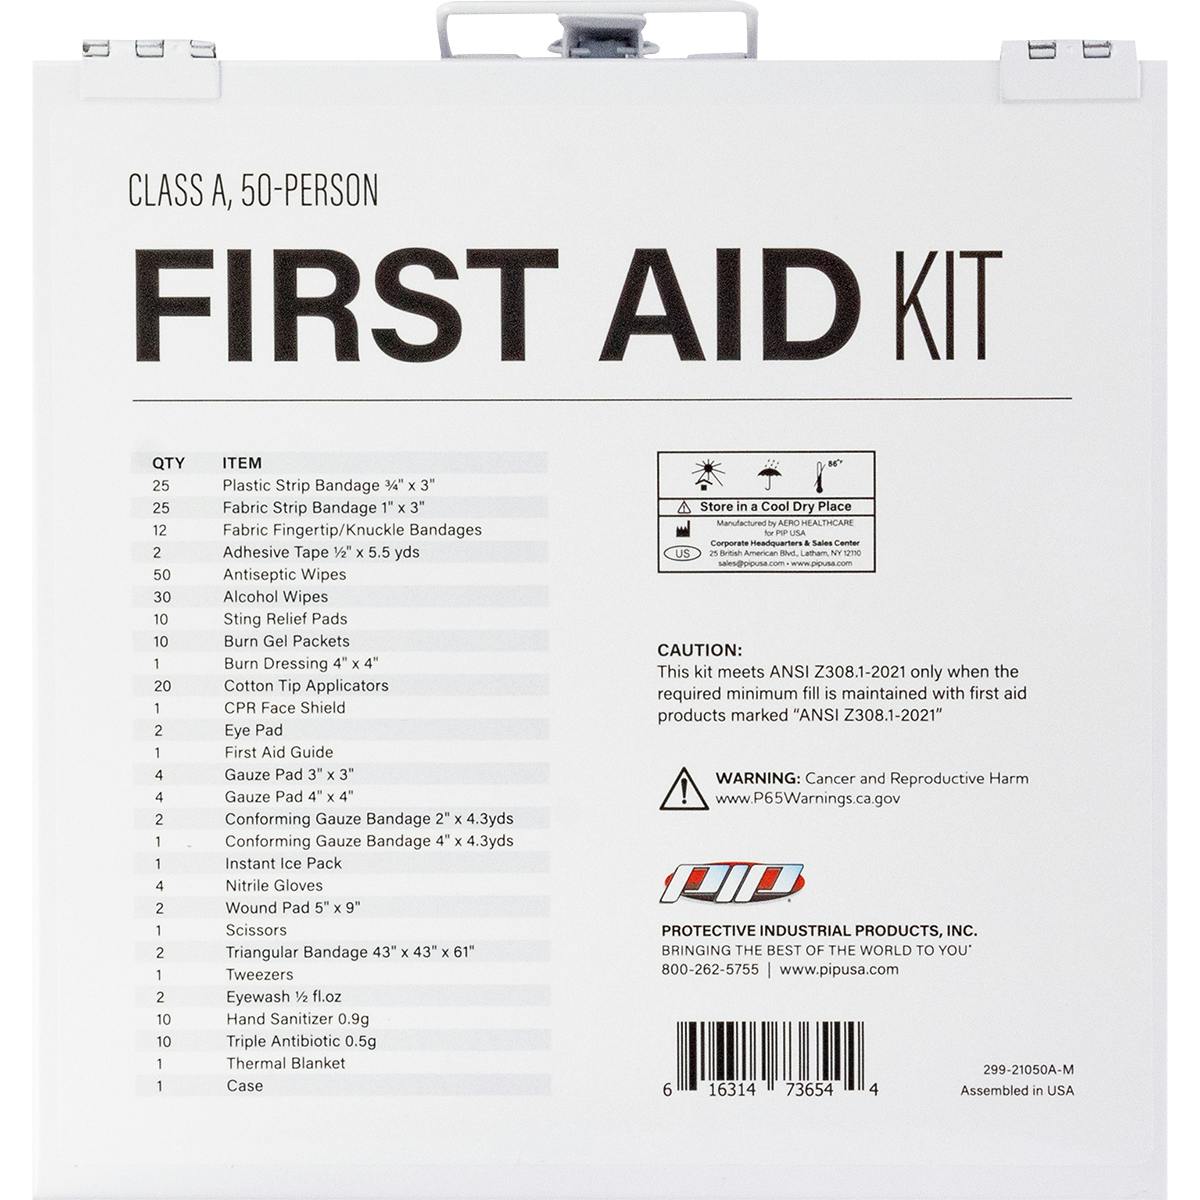 ANSI Class A Waterproof First Aid Kit - 50 Person, White (299-21050A-RP) - KIT